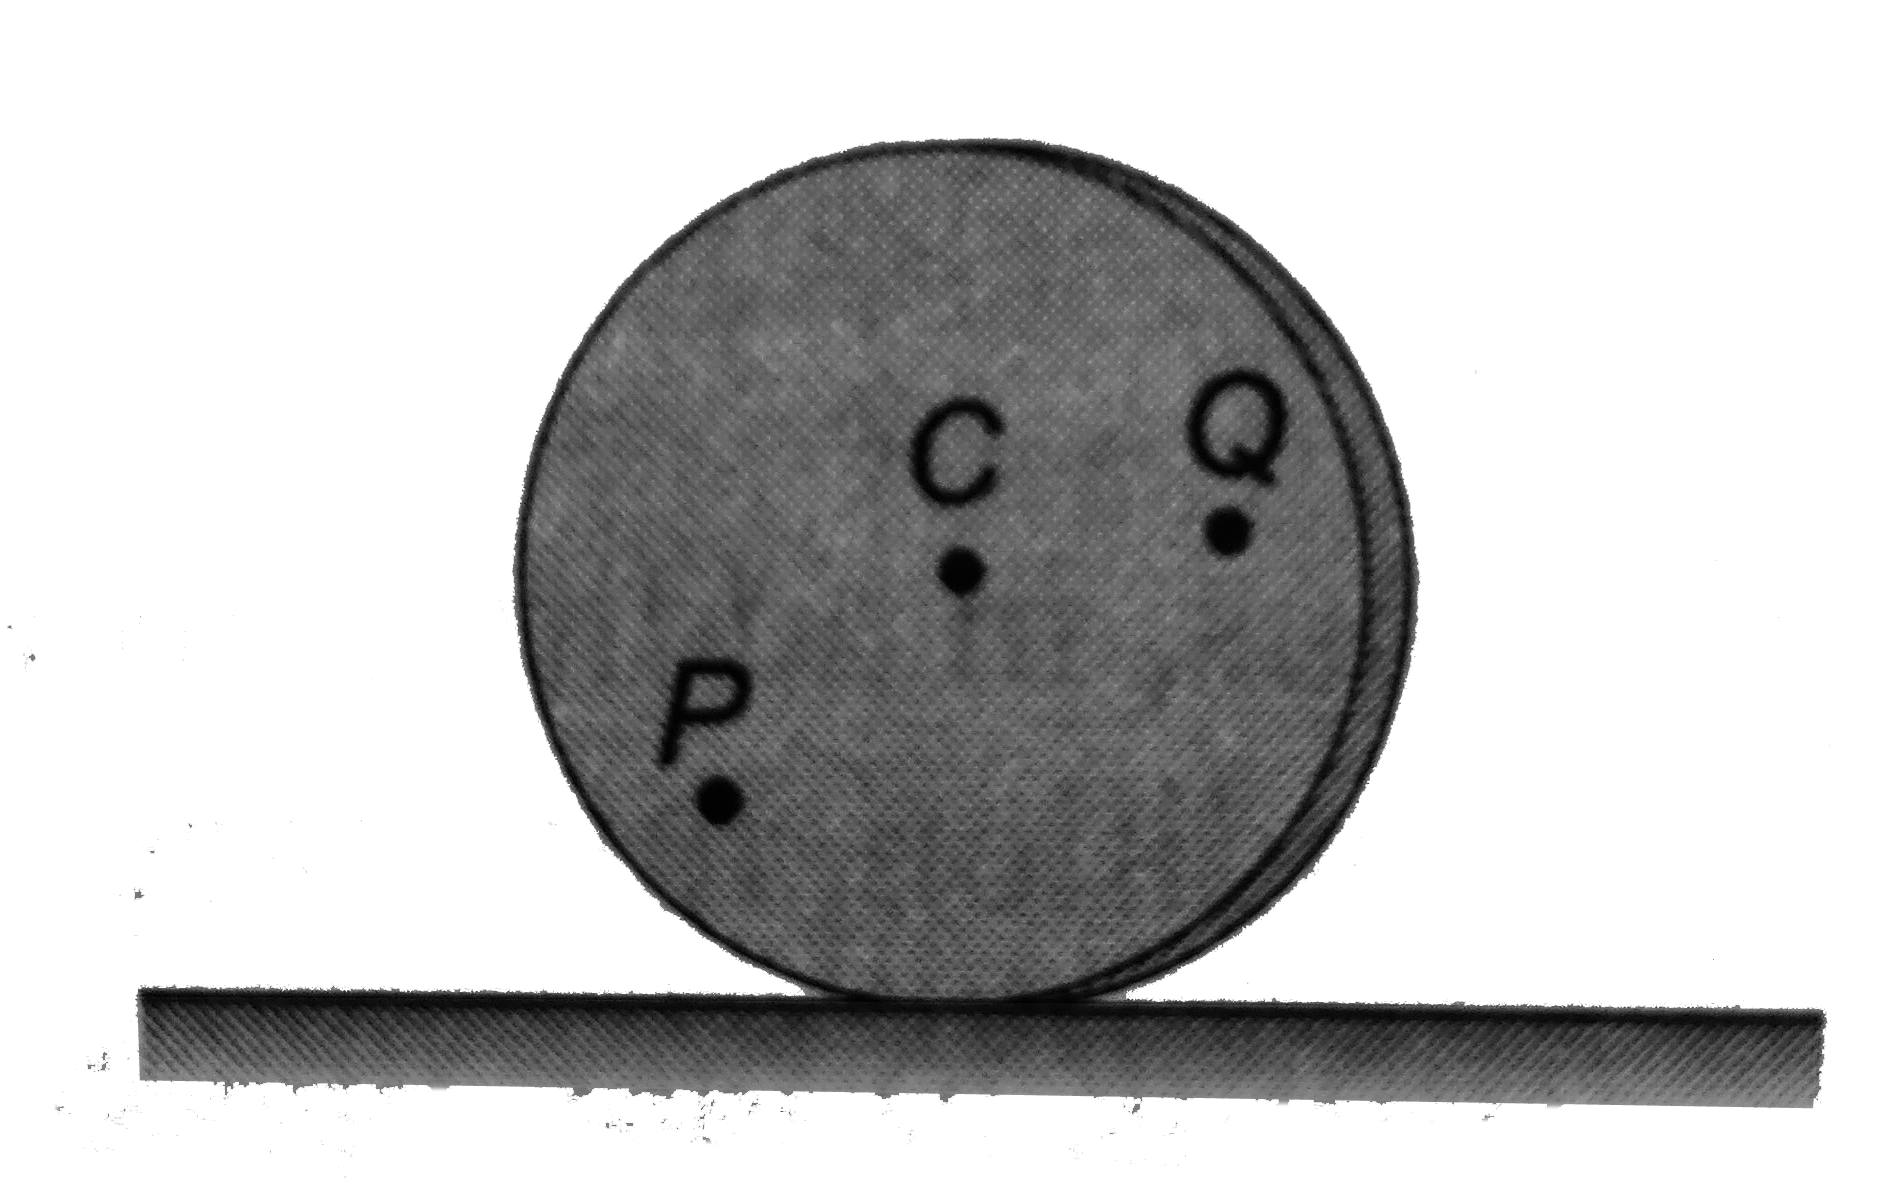 A disc is rolling (without slipping) on a horizontal surface. C is its centre and Q and P are two point equidistance from C. let upsilon(p),upsilon(Q) and upsilon(C) be the magnitude of velocities of points P, Q, and C repsectively,   (a). upsilon(Q)gtupsilon(C)gtupsilon(P)   (b). upsilon(Q)ltupsilon(C)ltupsilon(P)   (c). upsilon(Q)=upsilon(P),upsilon(C)=(1)/(2)upsilon(P)   (d). upsilon(Q)ltupsilon(C)gtupsilon(P)